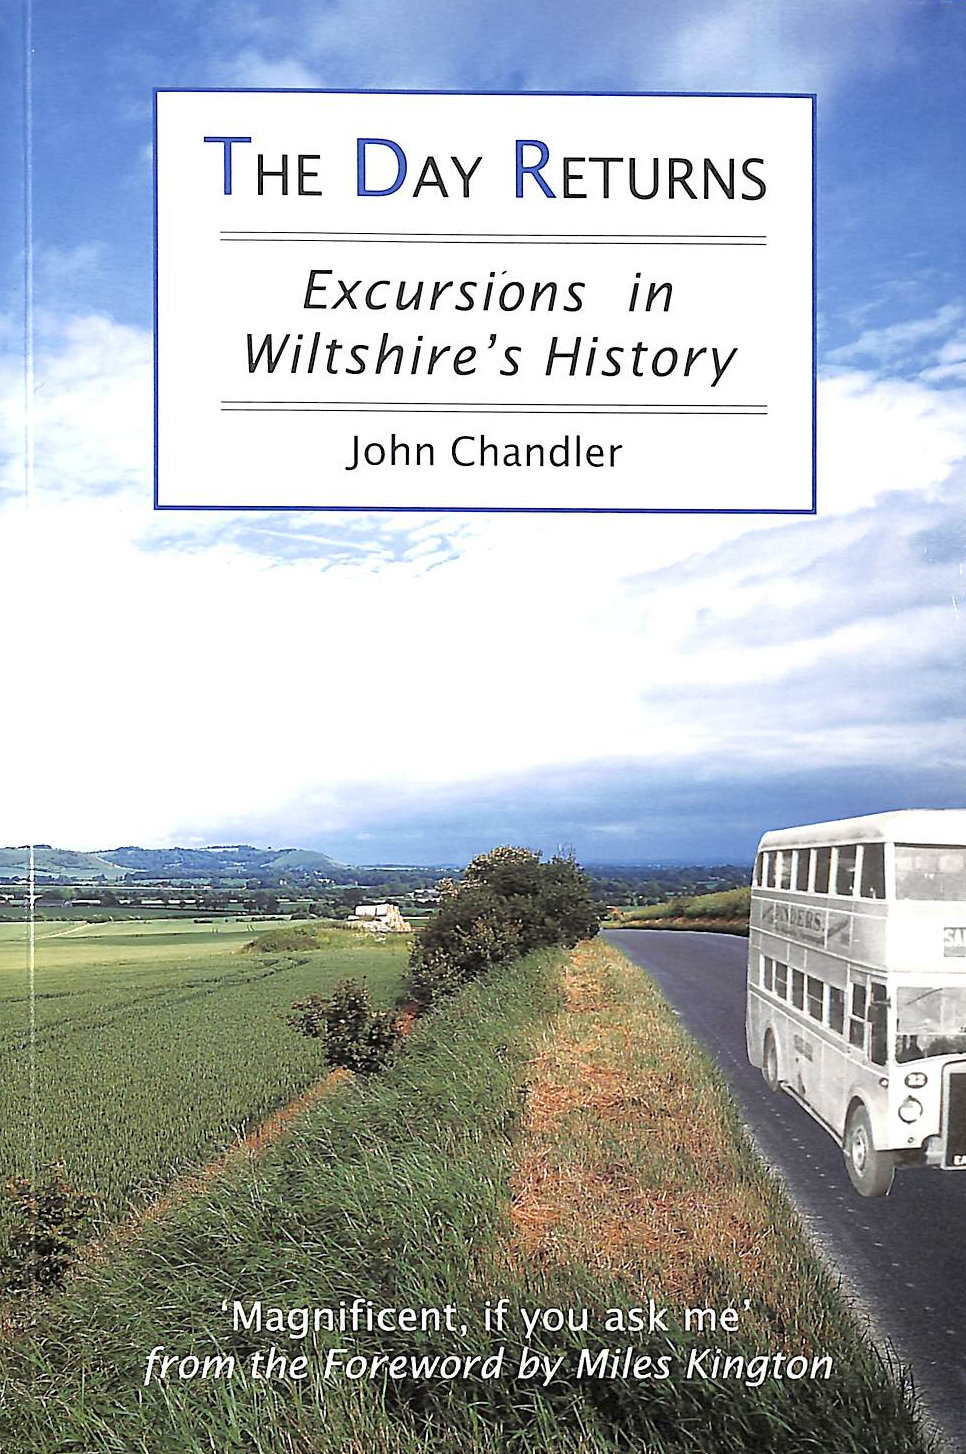 CHANDLER, JOHN - Day Returns: Excursions in Wiltshire's History